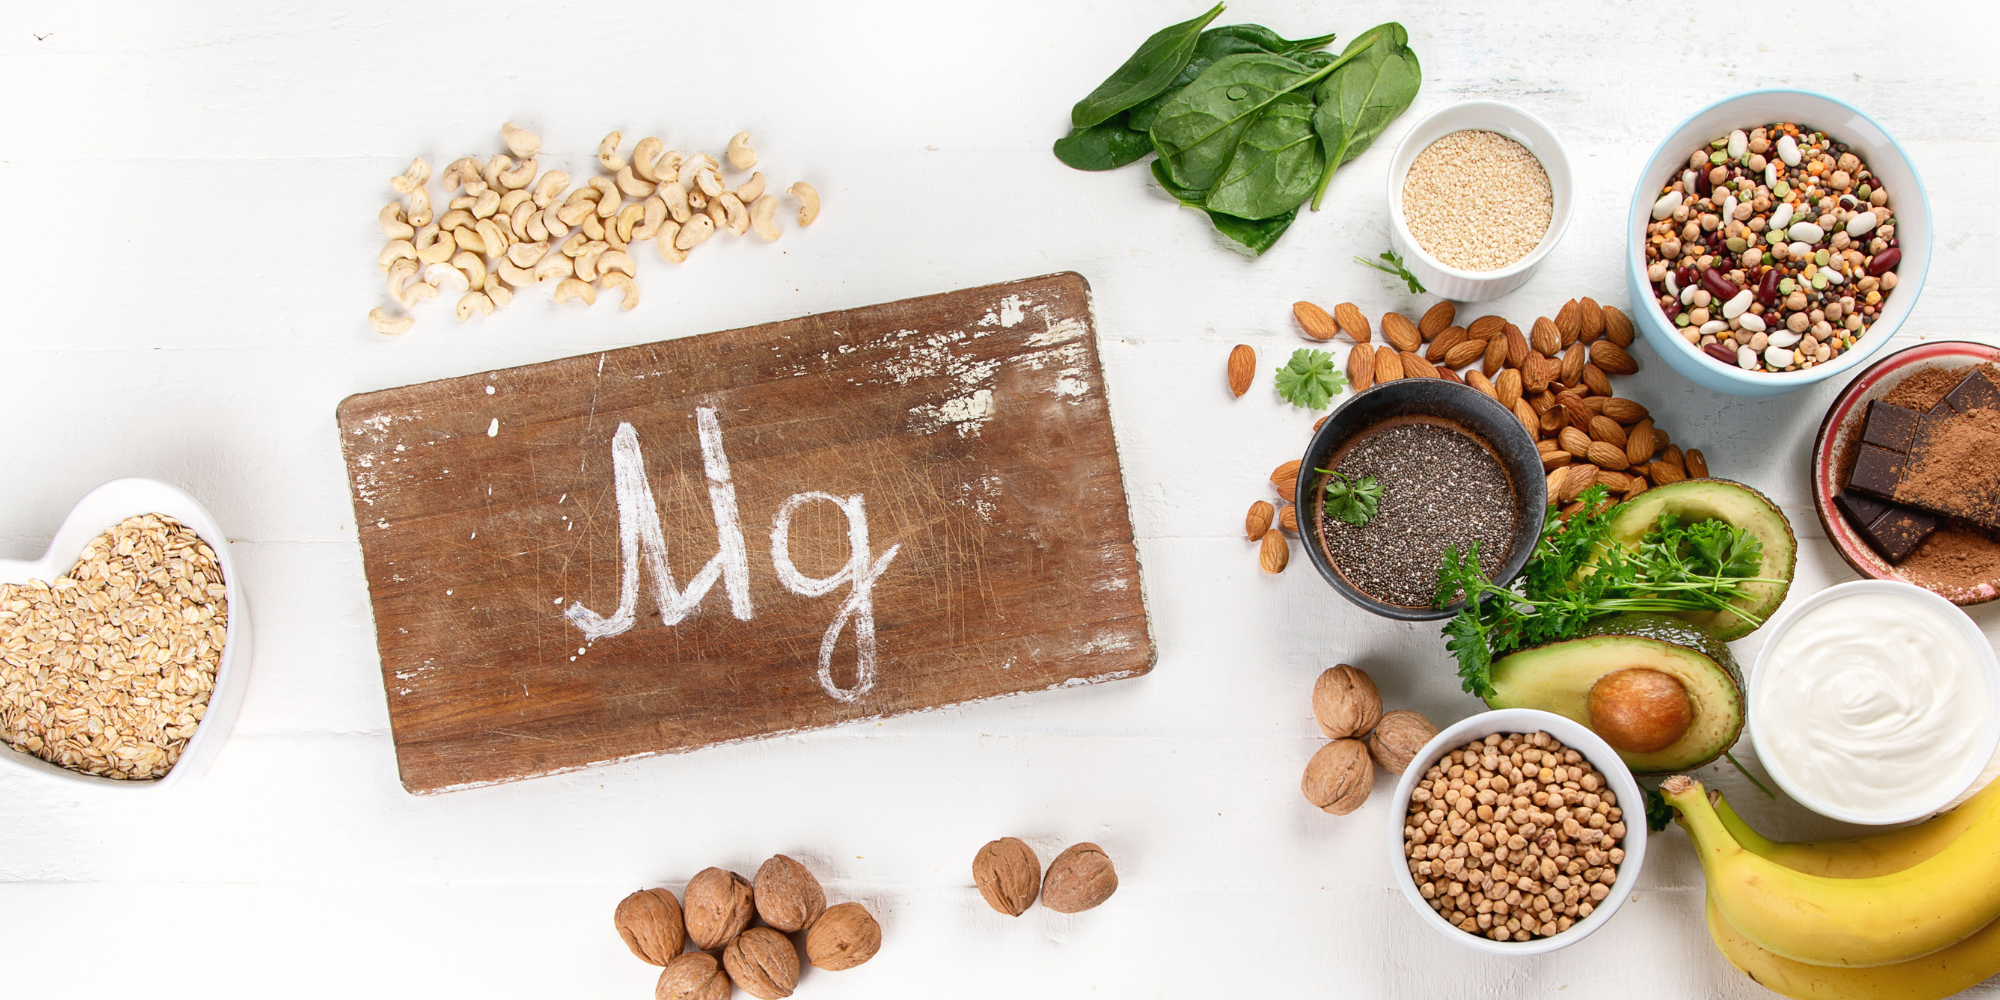 Various magnesium rich foods including dark chocolate, nuts, beans, spinach, chia seeds, and avocado, all around a sign on a cutting board that reads 